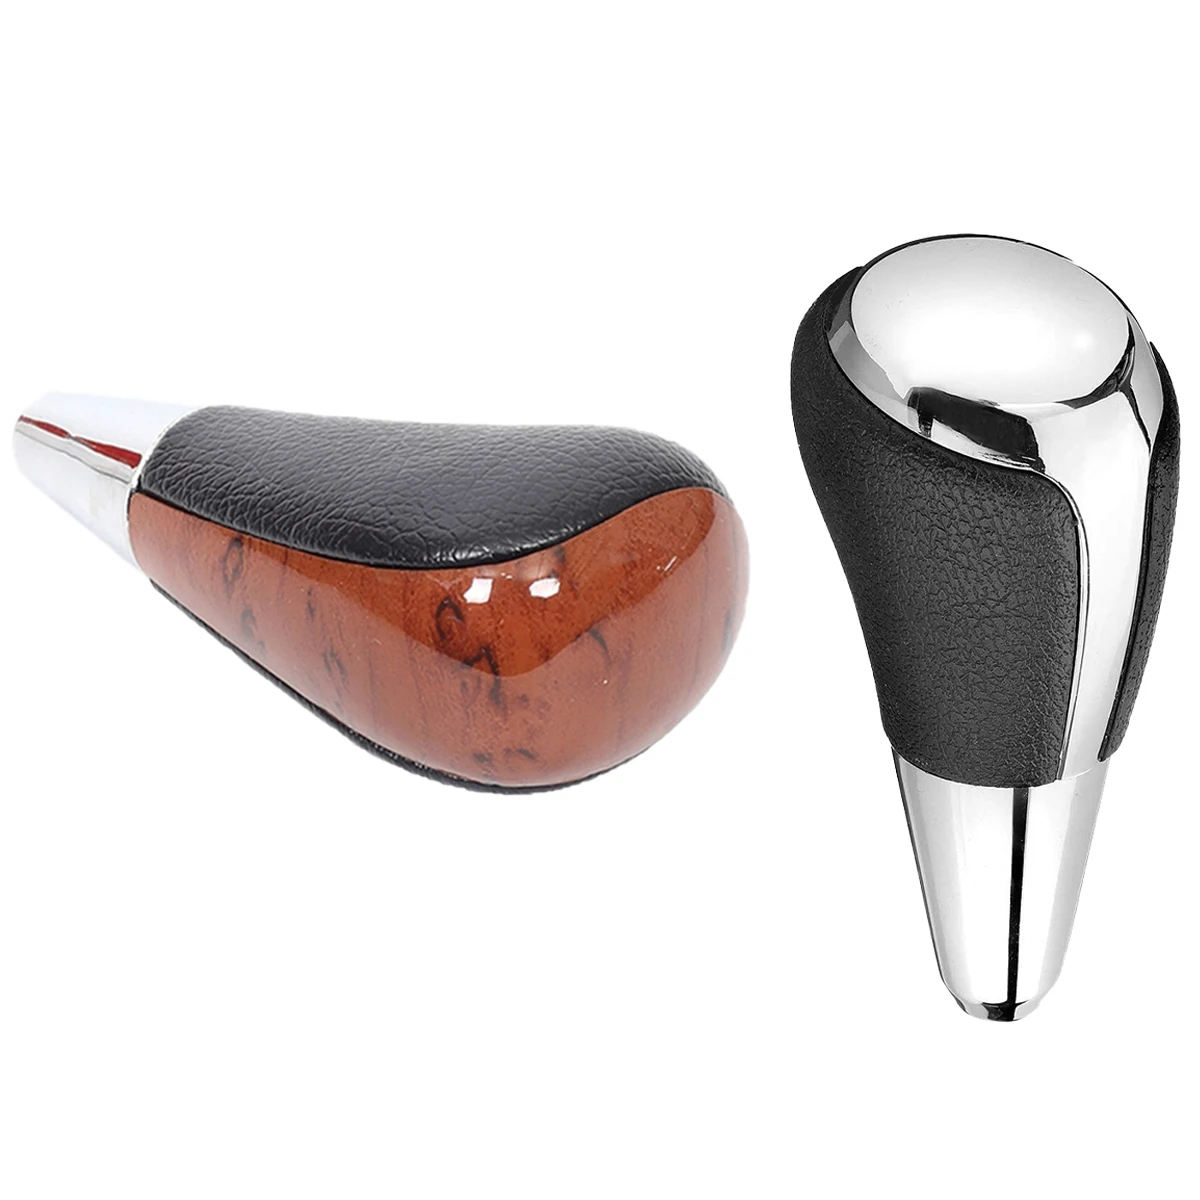 

2 Pcs Wood Grain Car Gear Shift Knob for Toyota Corolla Camry/Harrier Fortuner Crown Land Cruiser Lever Shifter Stick